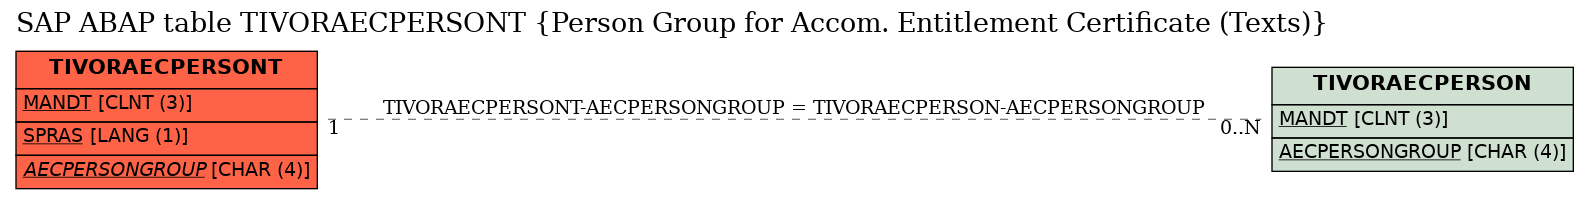 E-R Diagram for table TIVORAECPERSONT (Person Group for Accom. Entitlement Certificate (Texts))